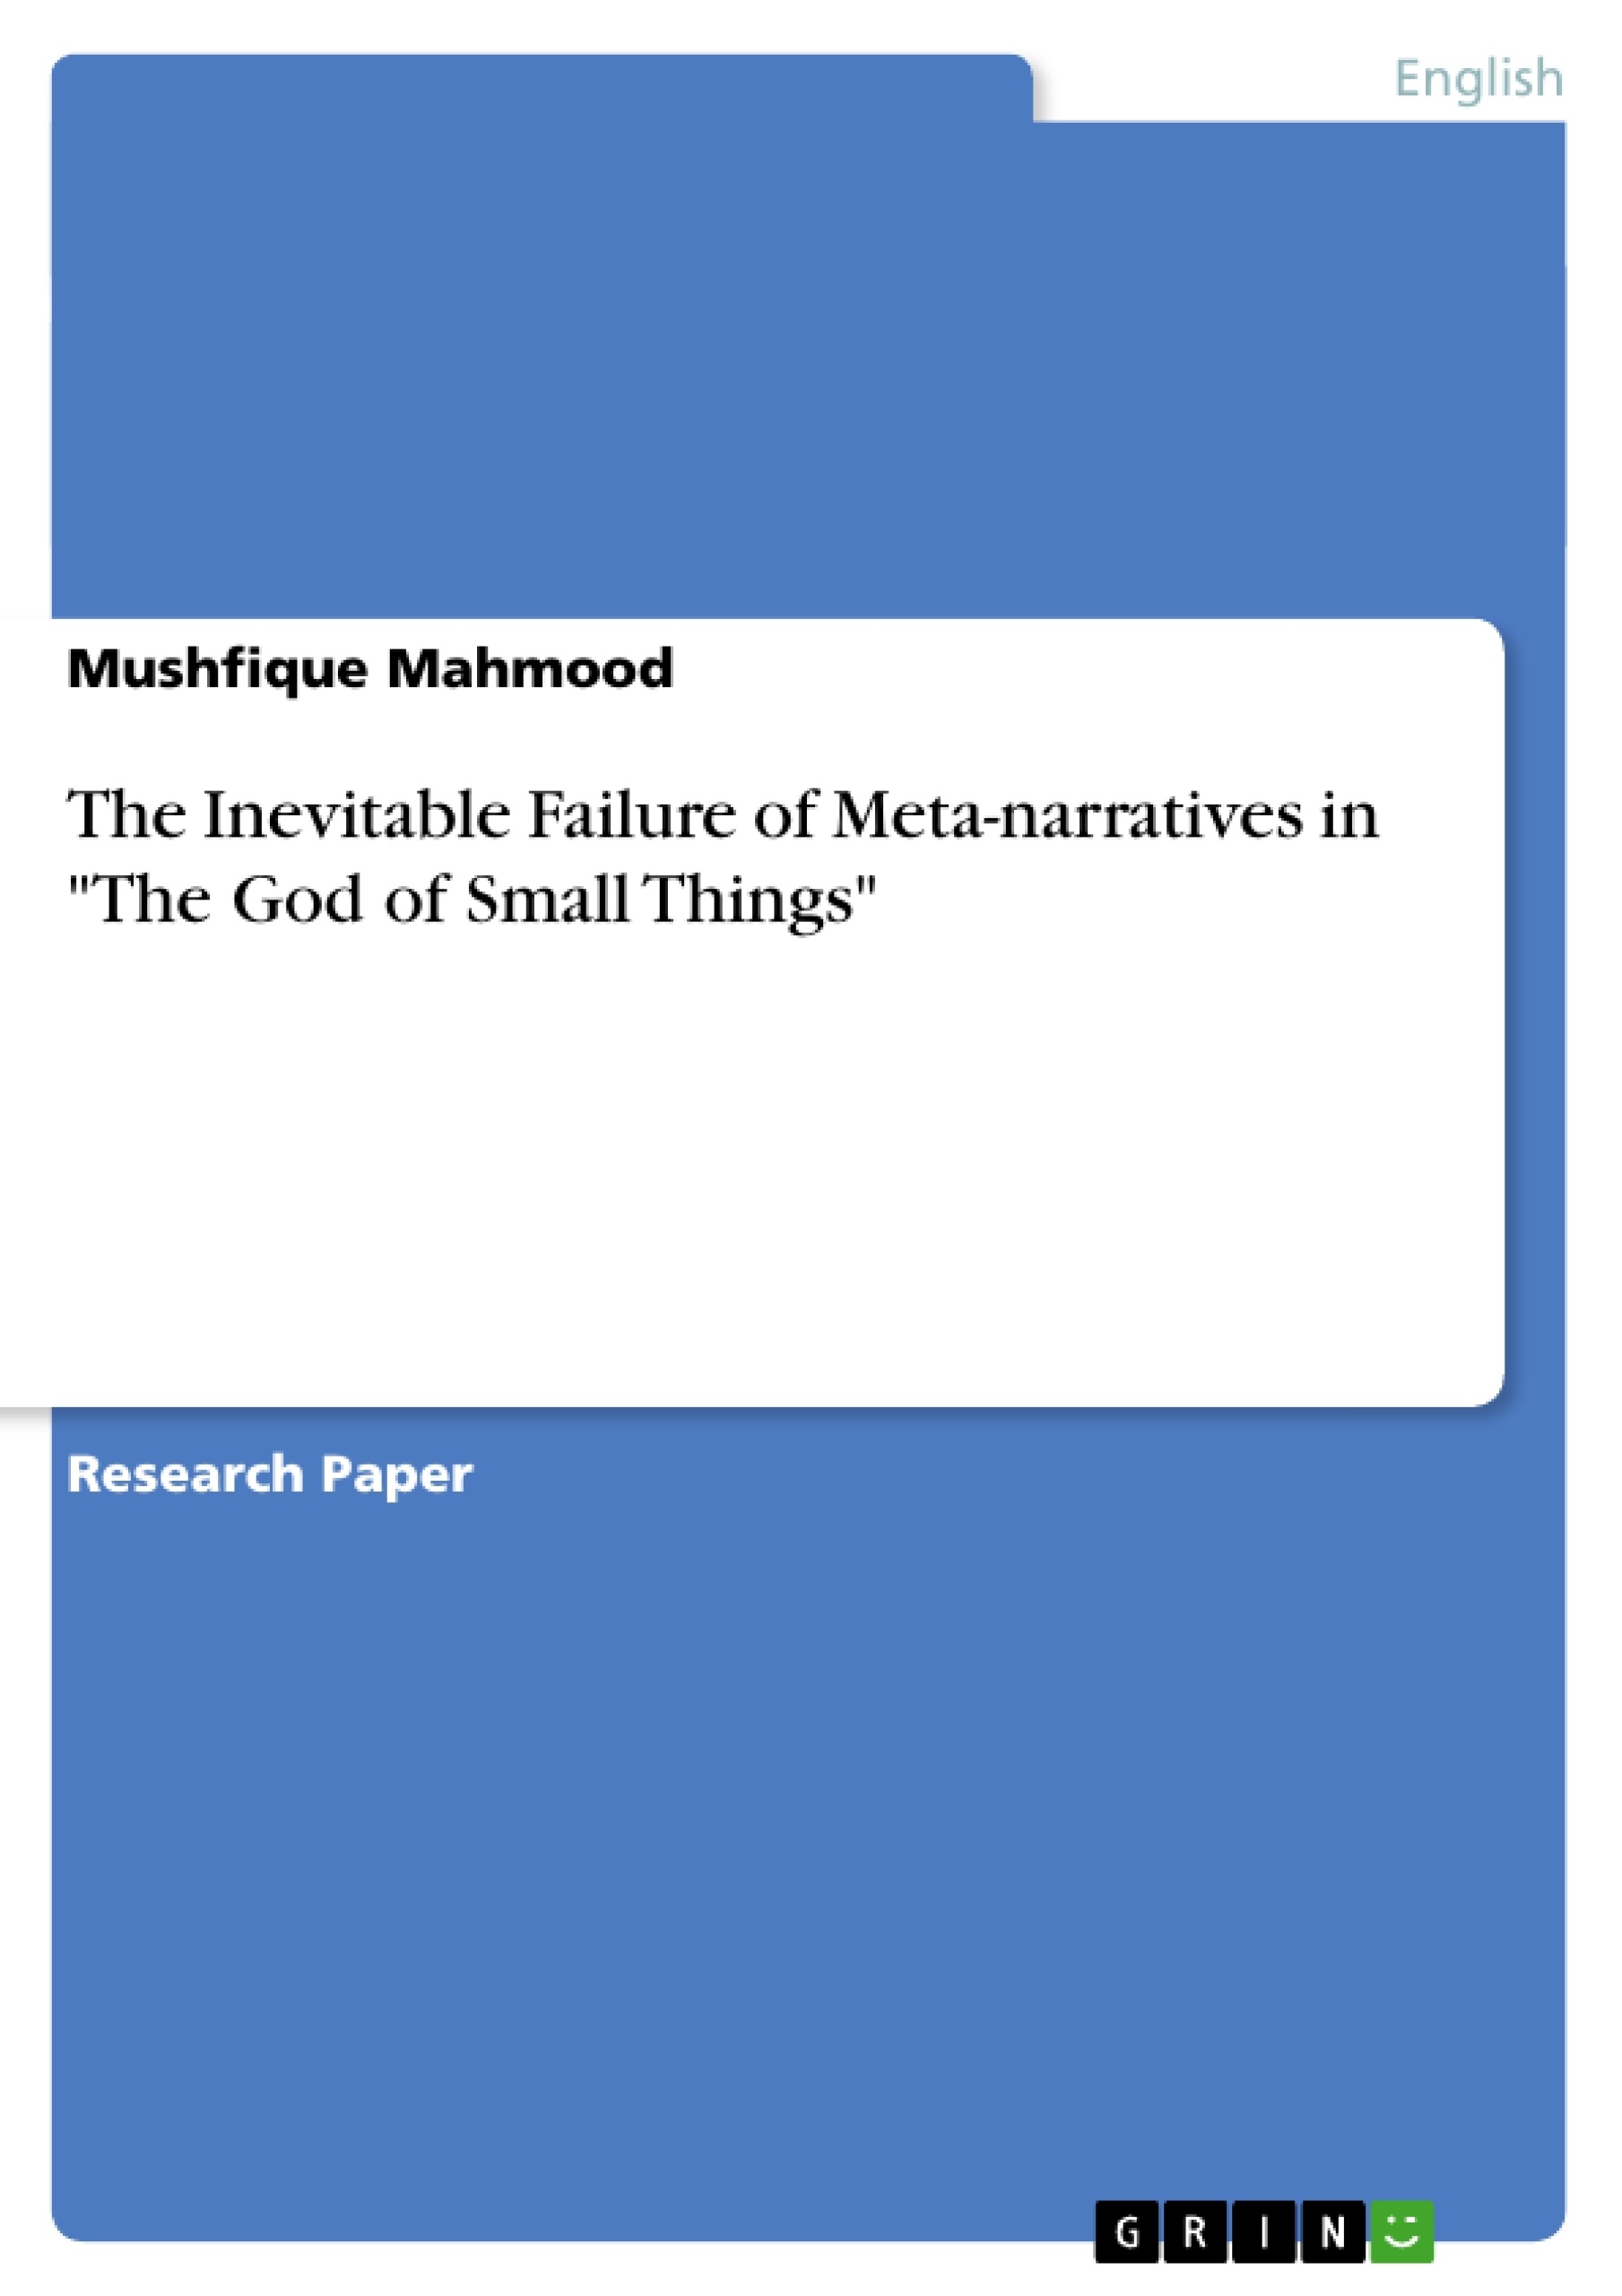 Título: The Inevitable Failure of Meta-narratives in "The God of Small Things"